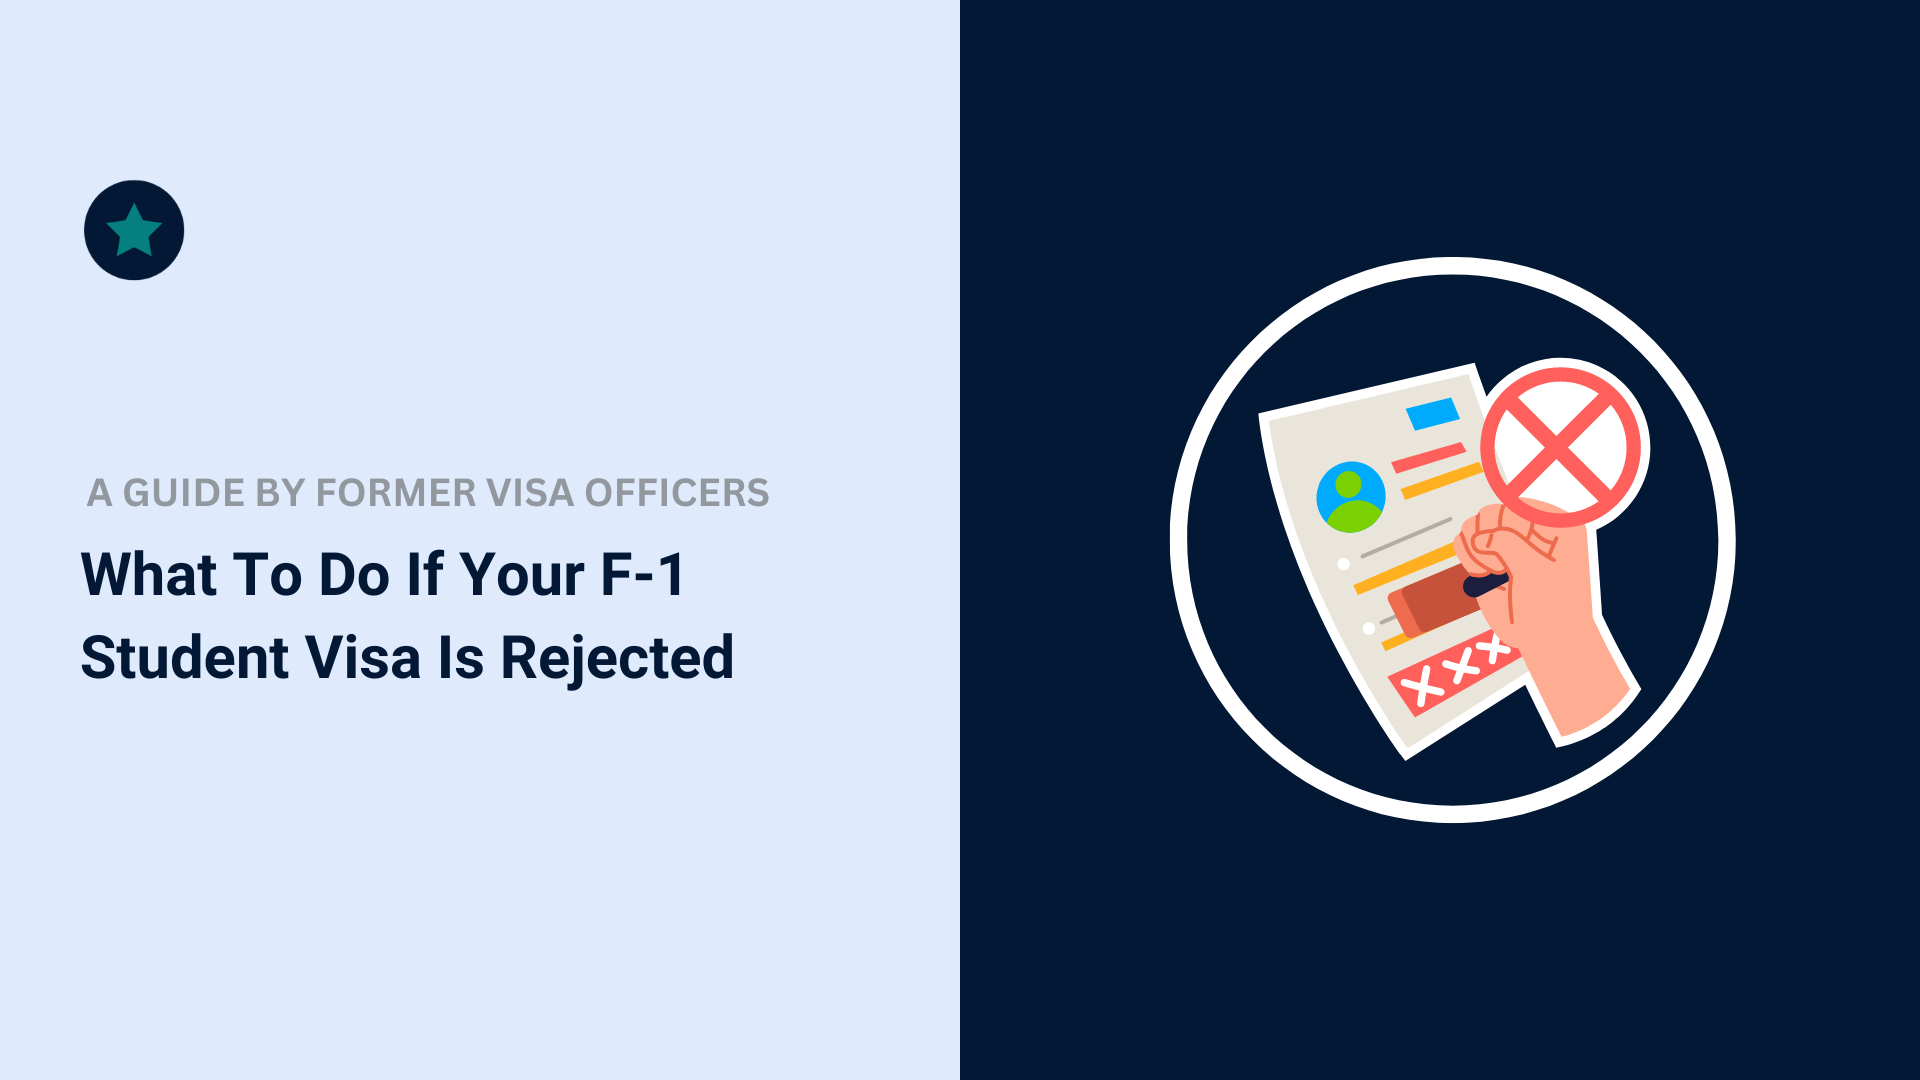 What to do if Your F-1 Student Visa is Rejected